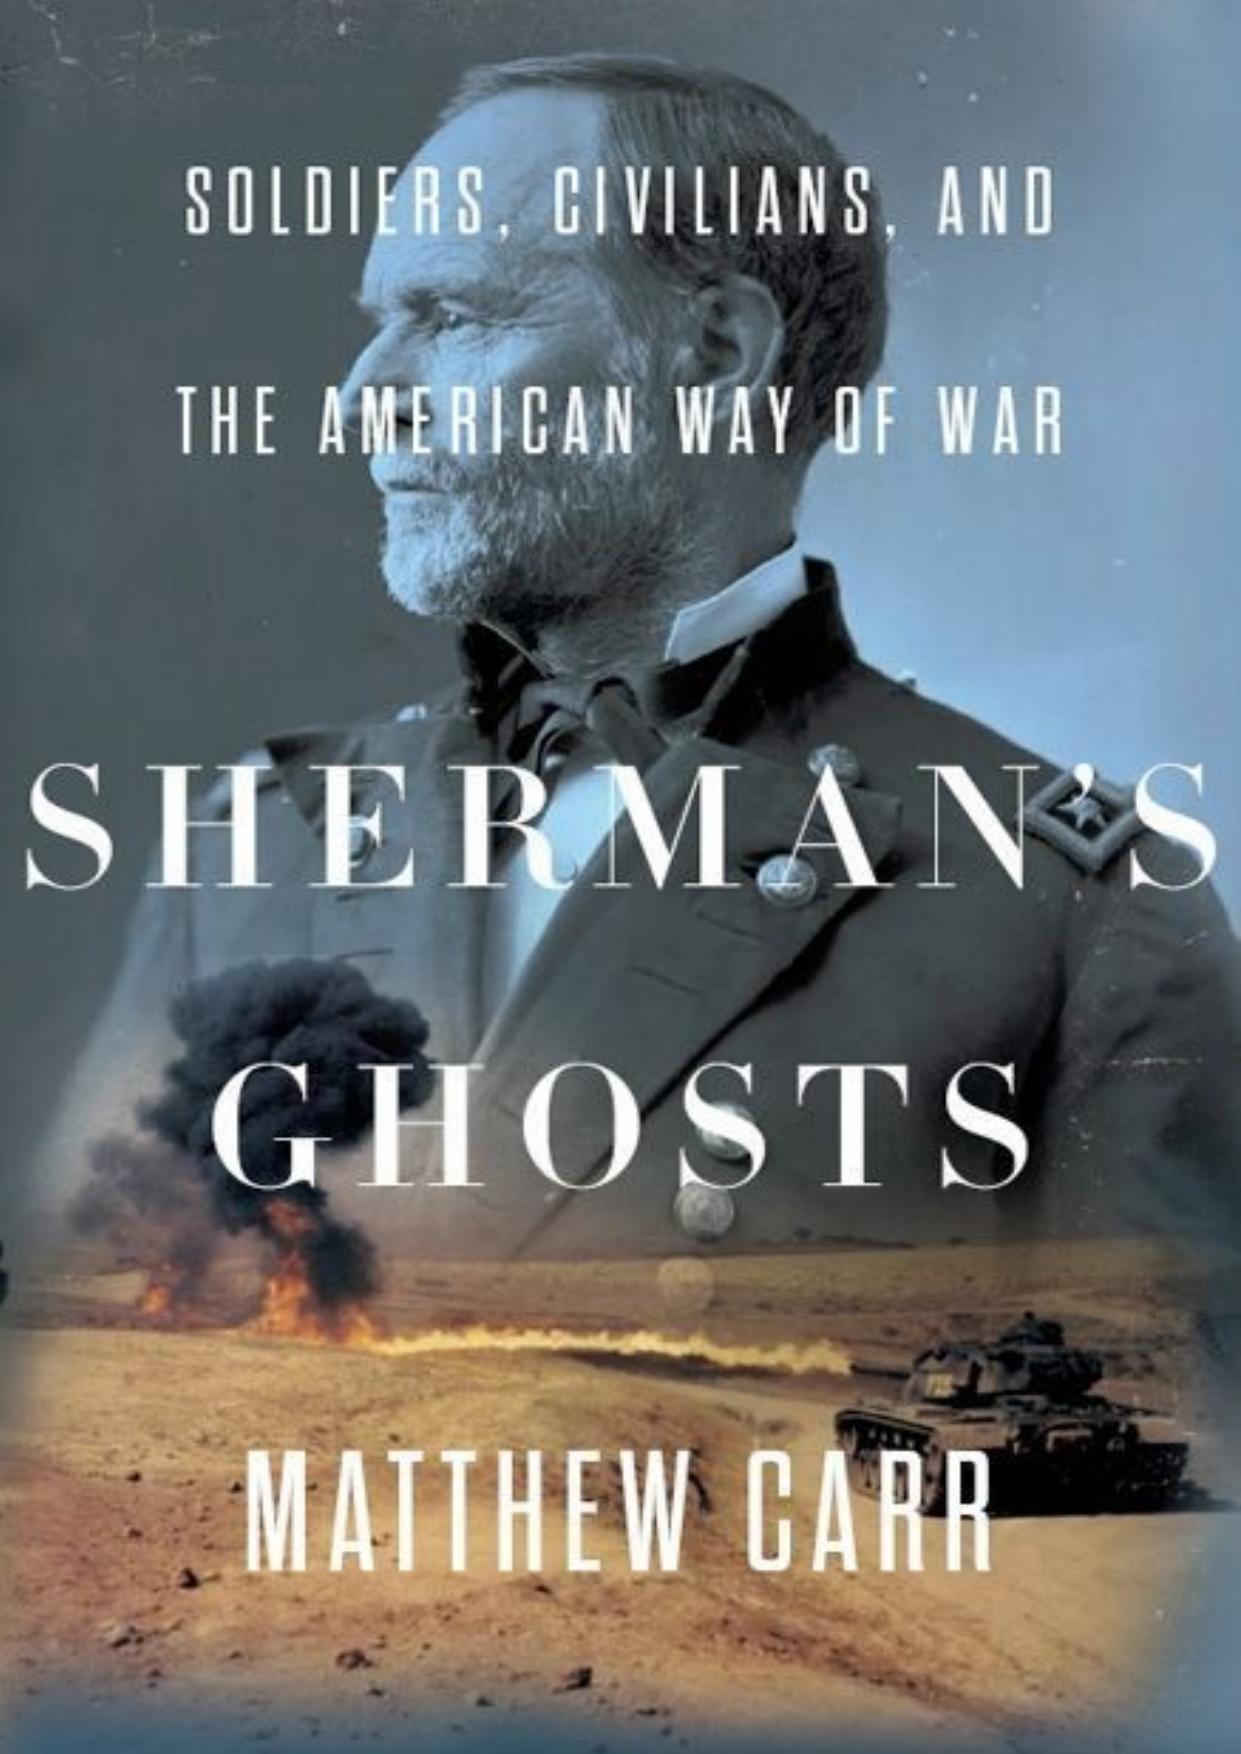 Sherman's Ghosts: Soldiers, Civilians, and the American Way of War by Matthew Carr